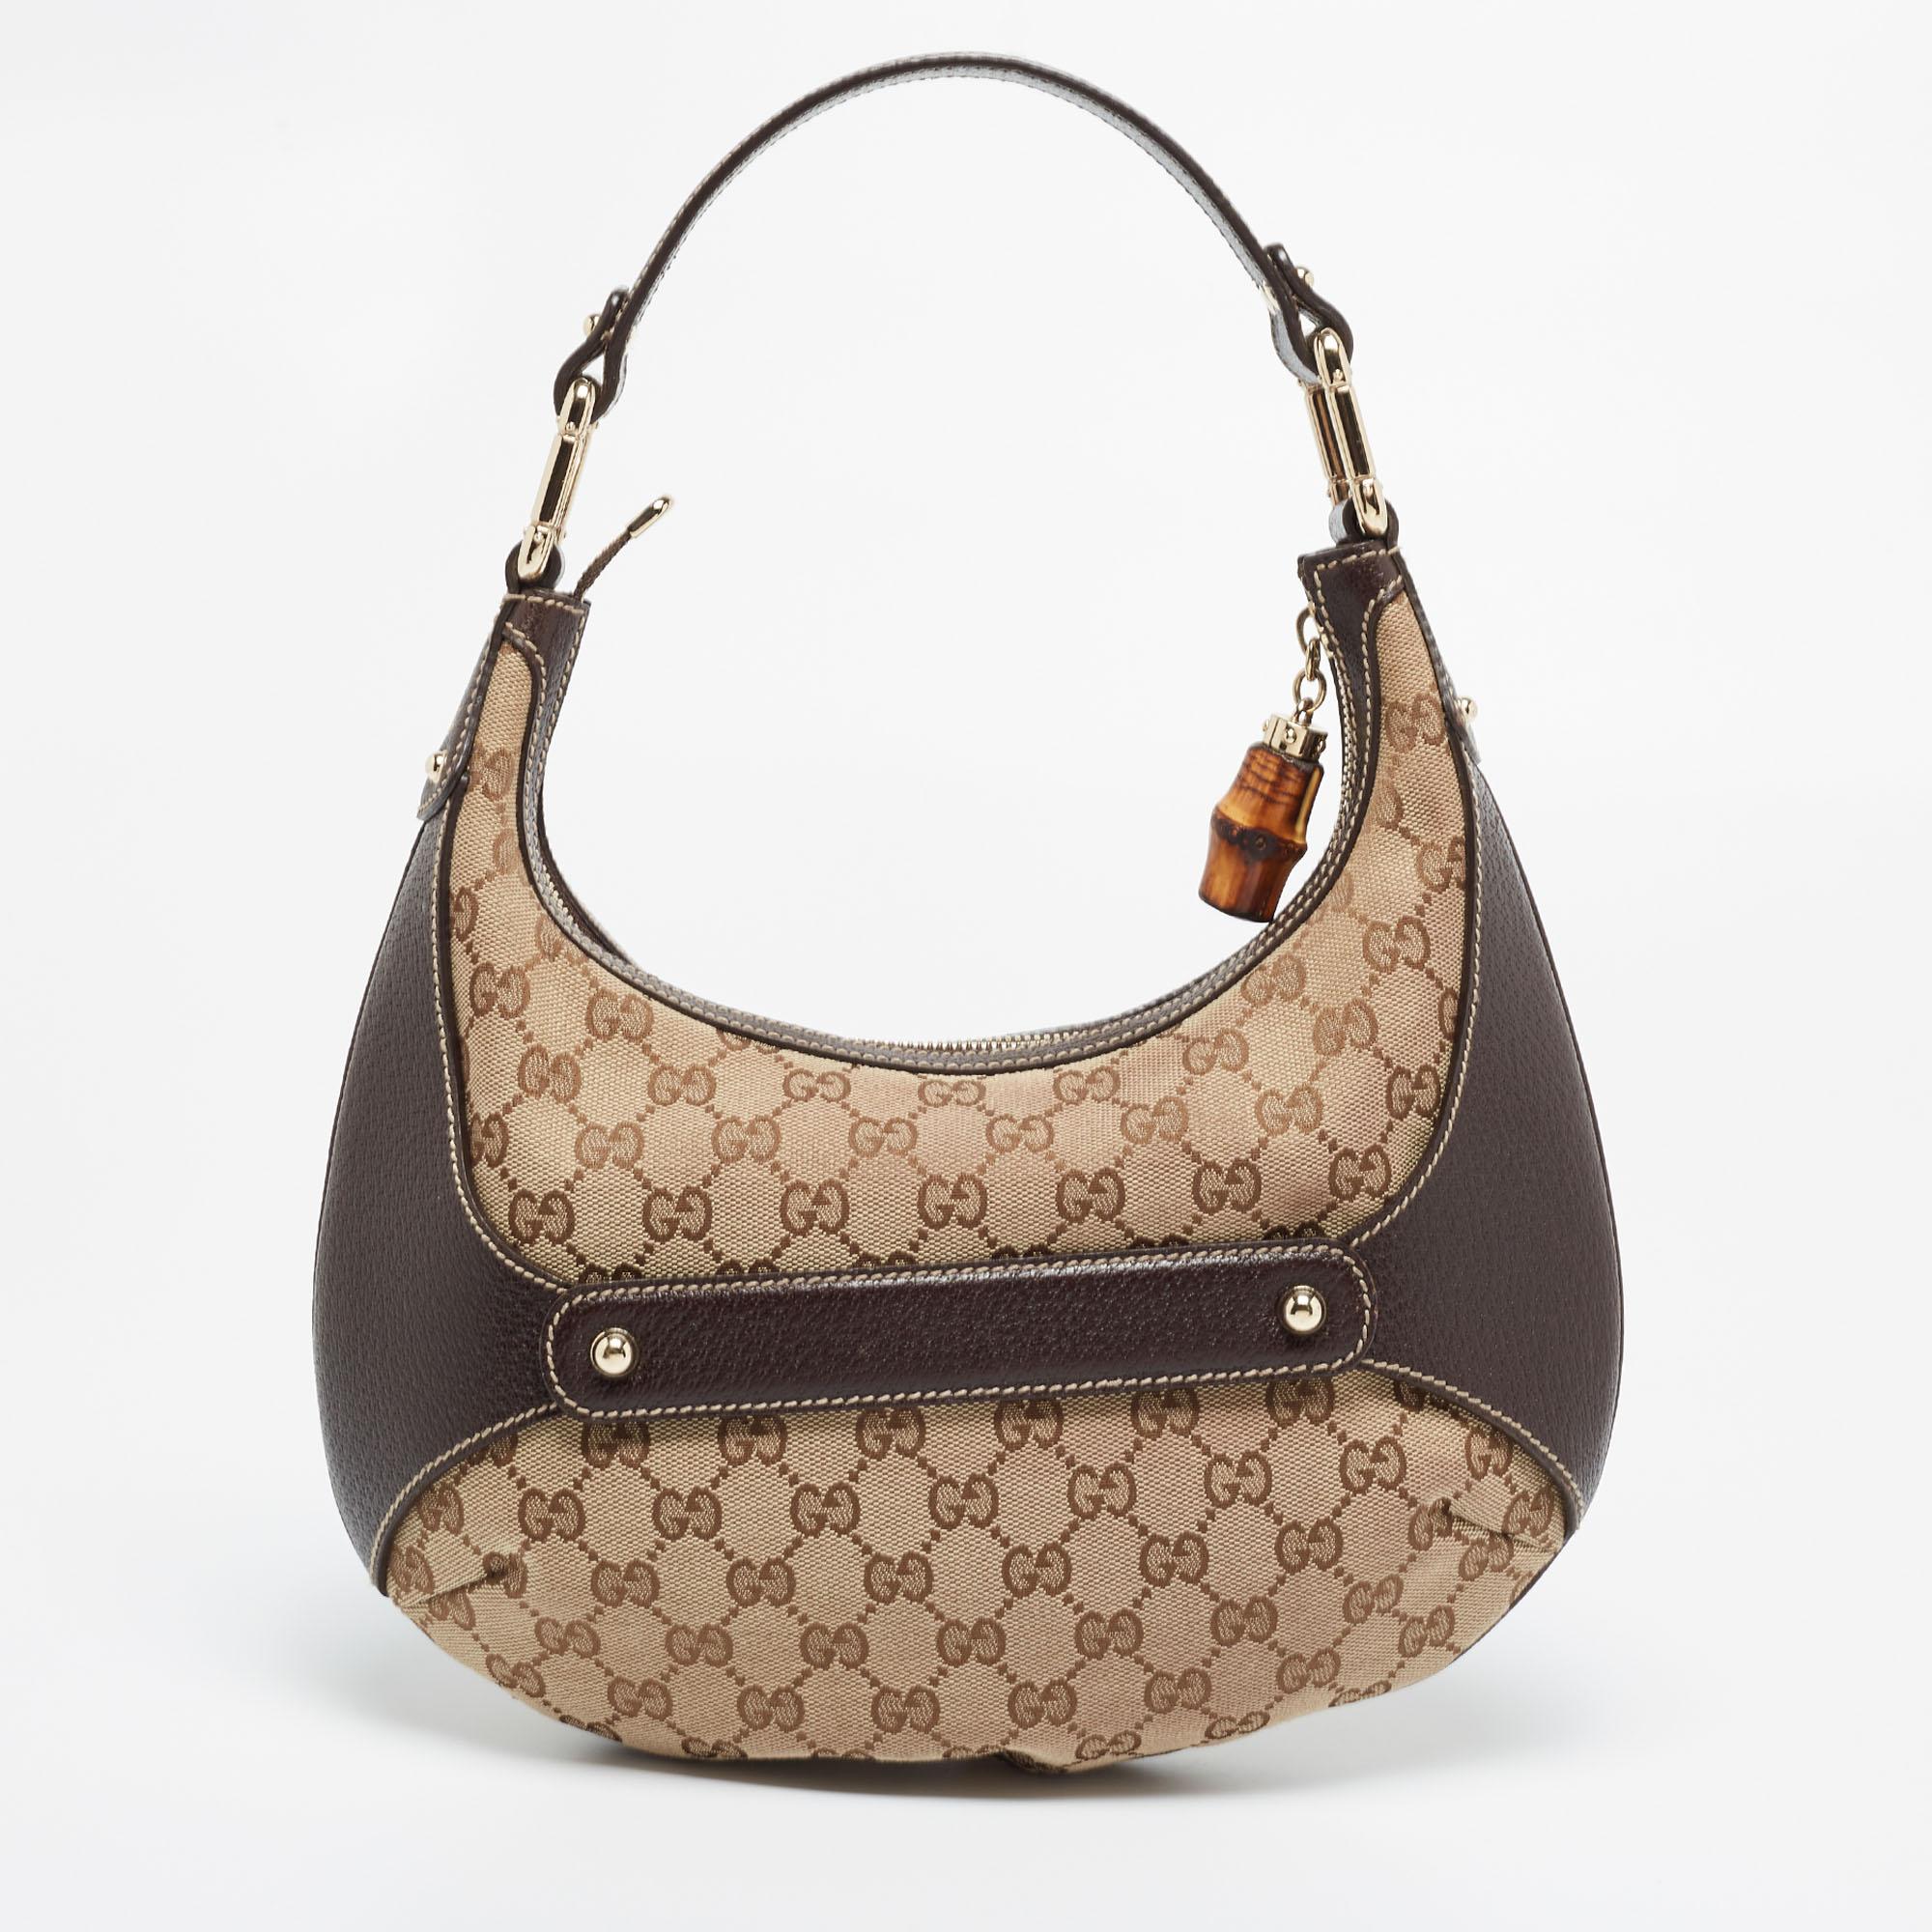 An instantly recognizable piece, Gucci brings to you this amazing Amalfi hobo. Made in Italy, this beige/brown hobo is crafted from classic GG canvas and leather. The bamboo zip closure opens to a fabric-lined interior that has enough space to hold